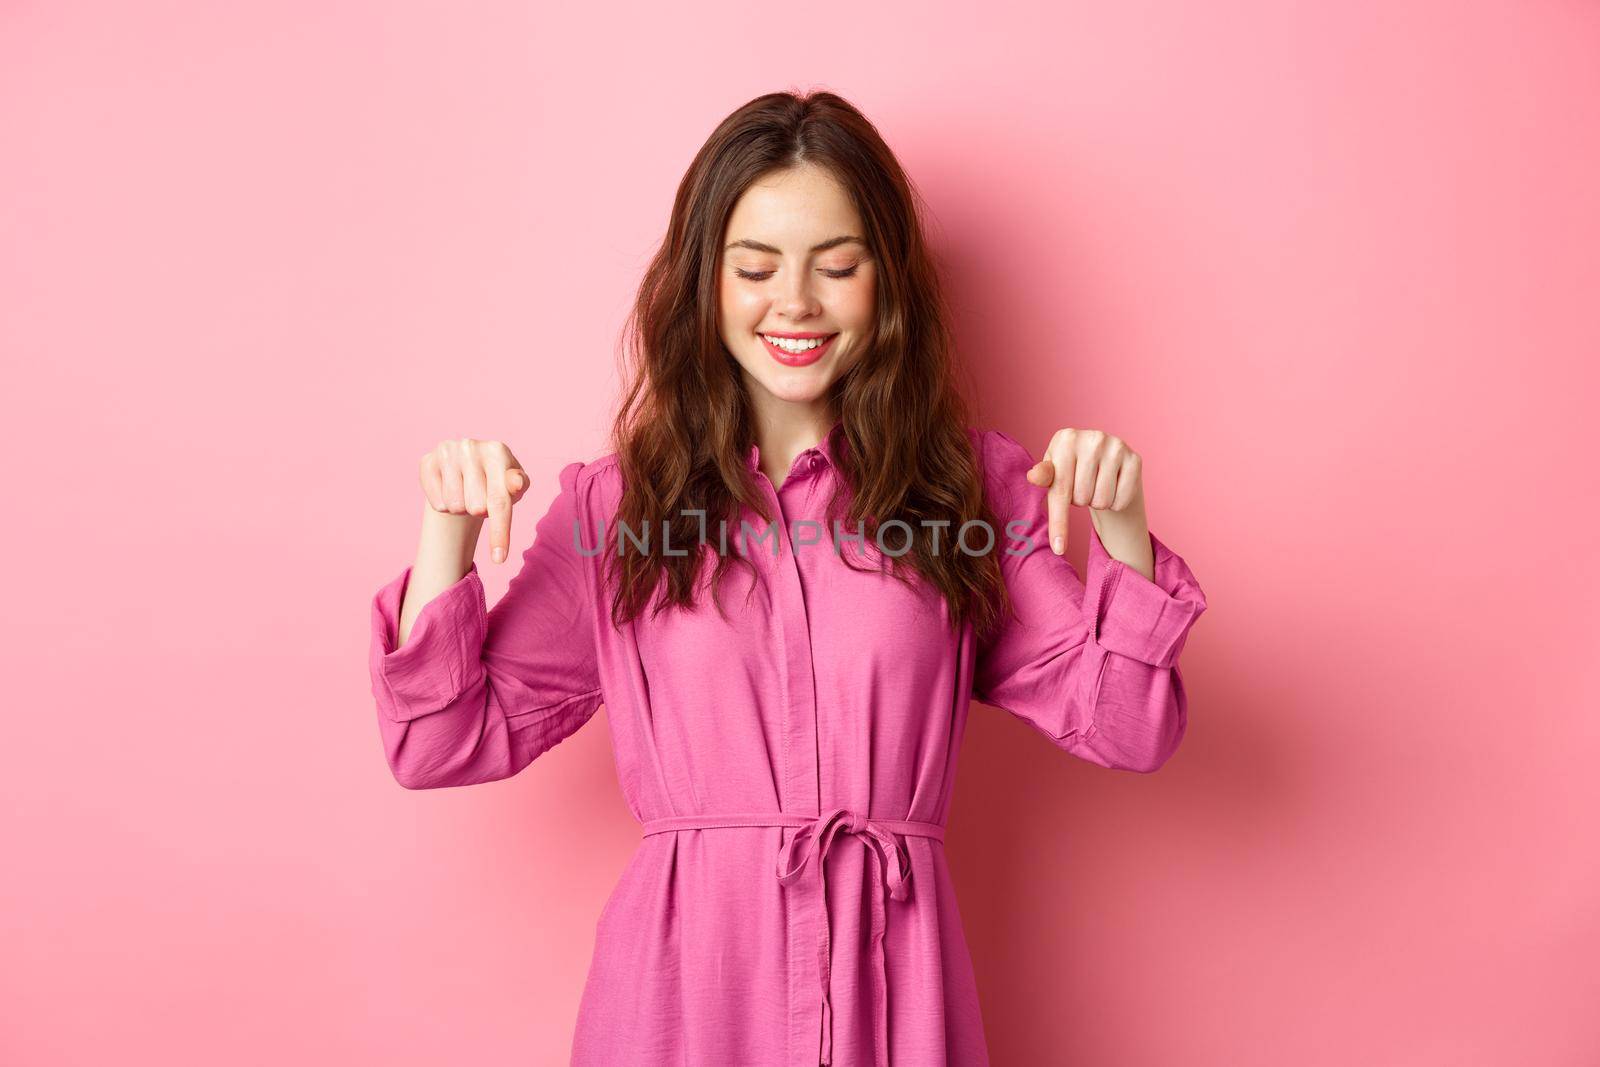 Attractive female model in spring outfit, pointing and looking down, showing copyspace aside, standing against pink background.